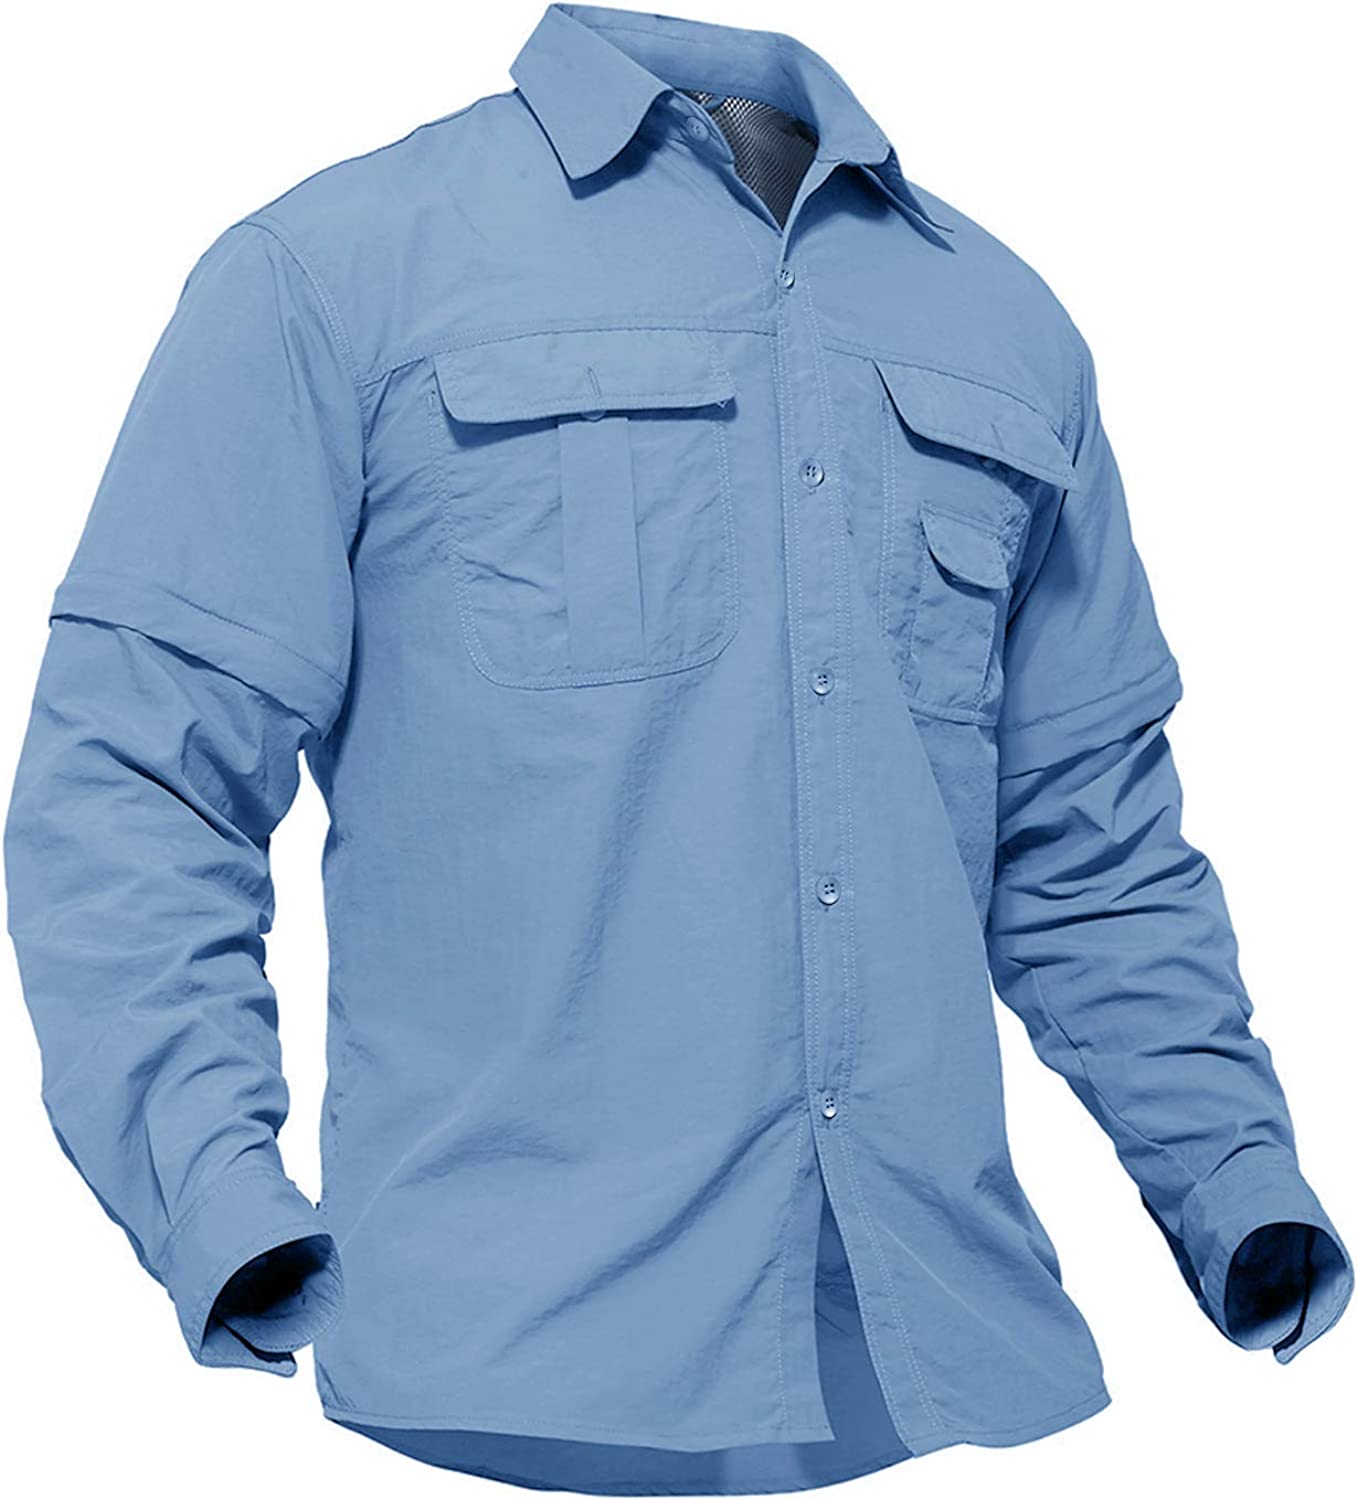 Men's Breathable Quick Dry UV Protection Solid Convertible Long Sleeve Shirt